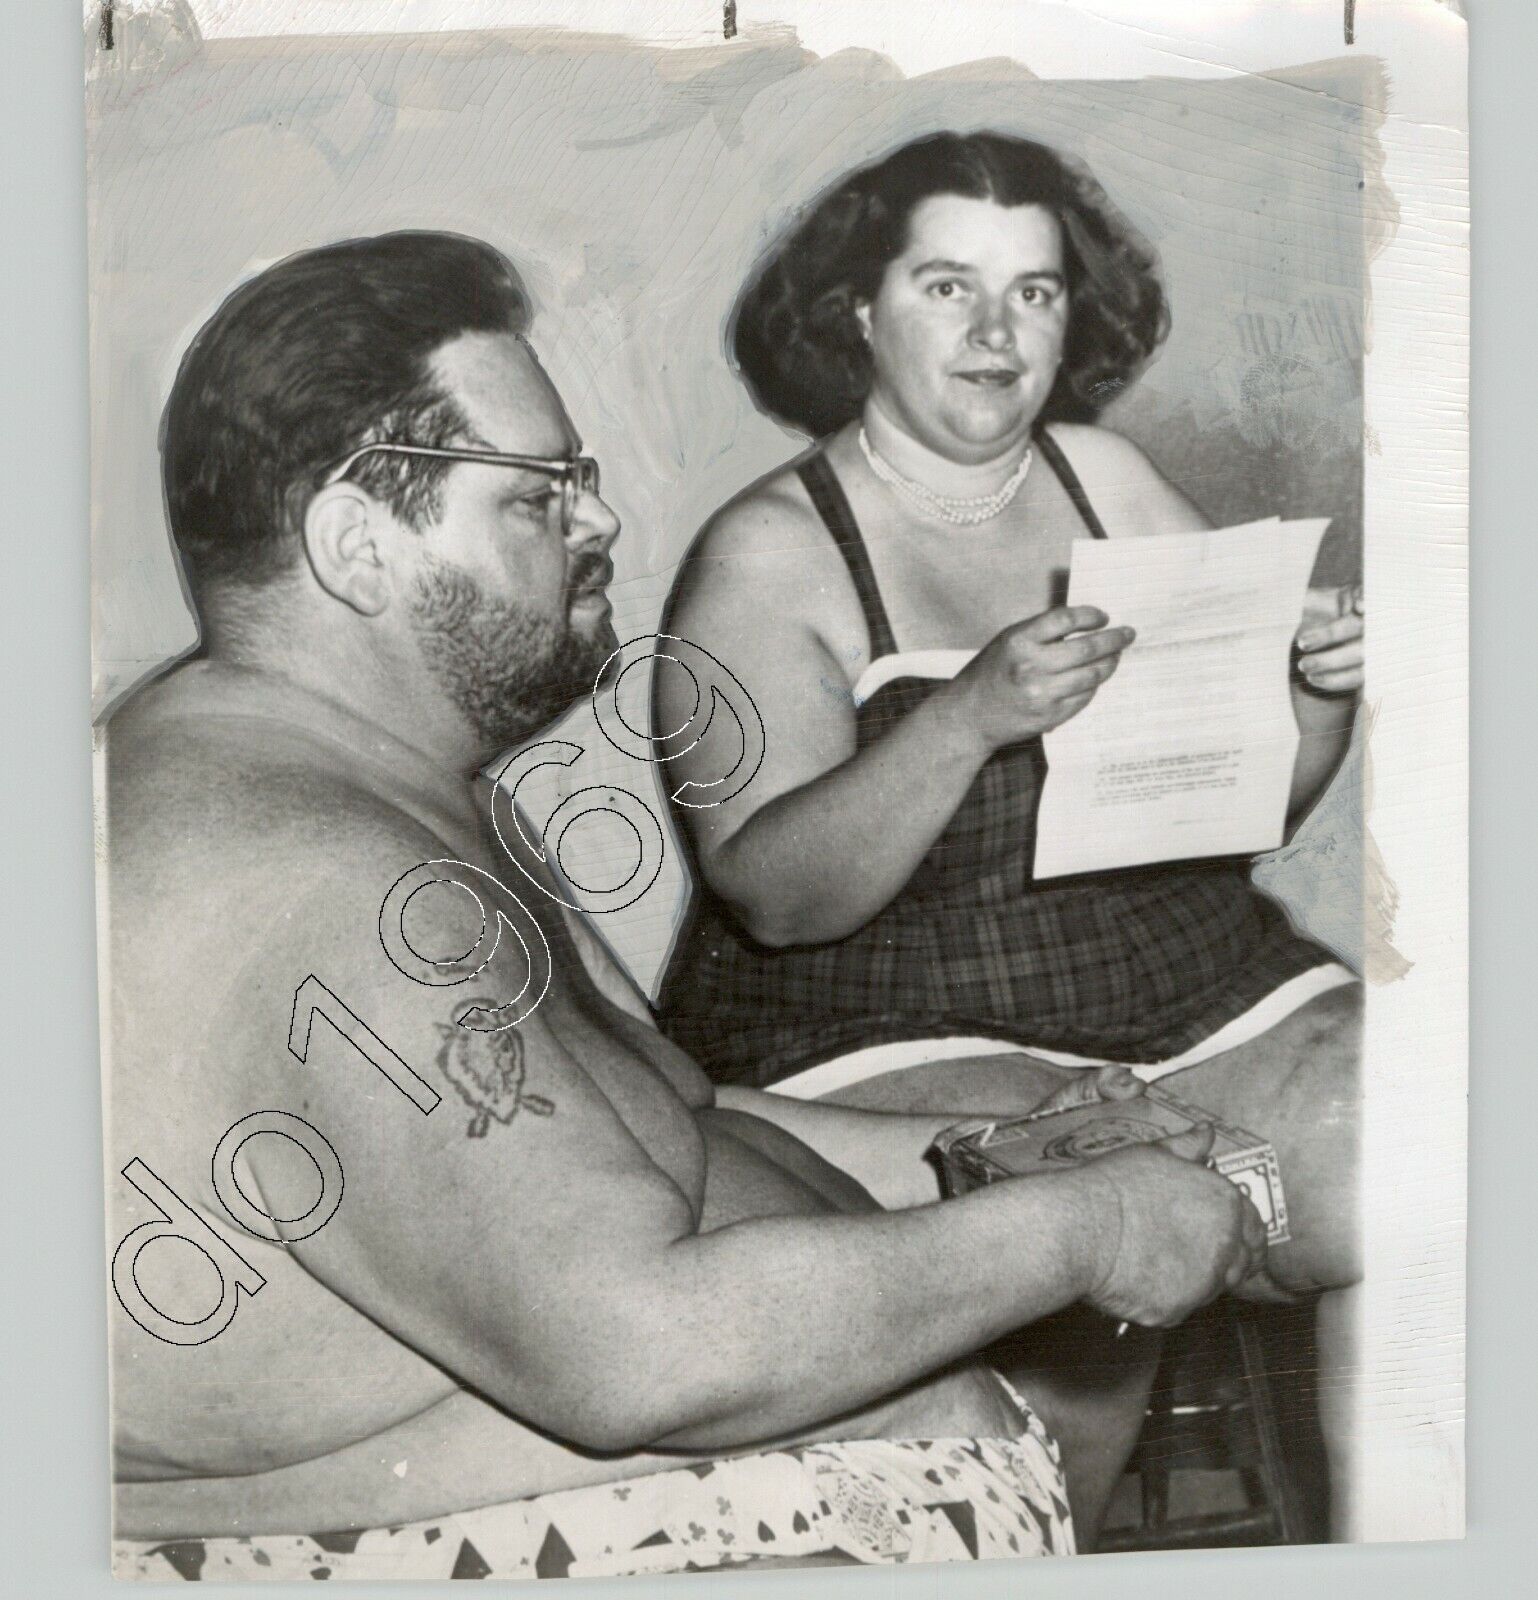 Obese COWLAN Couple on Honeymoon Carnival Sideshow Actors 1956 Press Photo